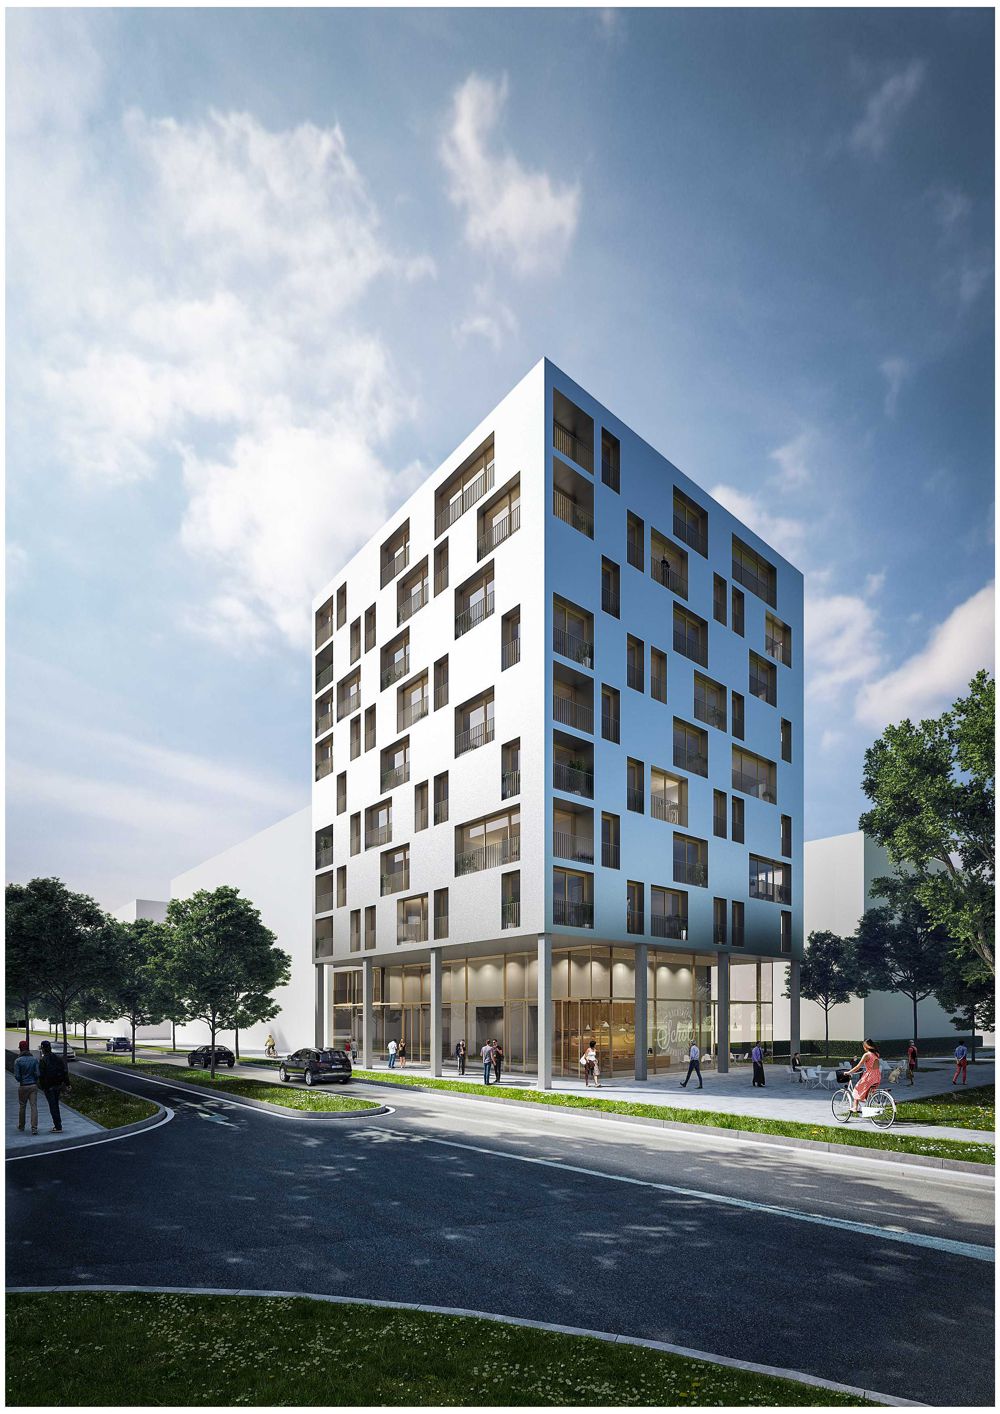 STRABAG subsidiary ZÜBLIN starts construction of Germany’s first timber high-rise